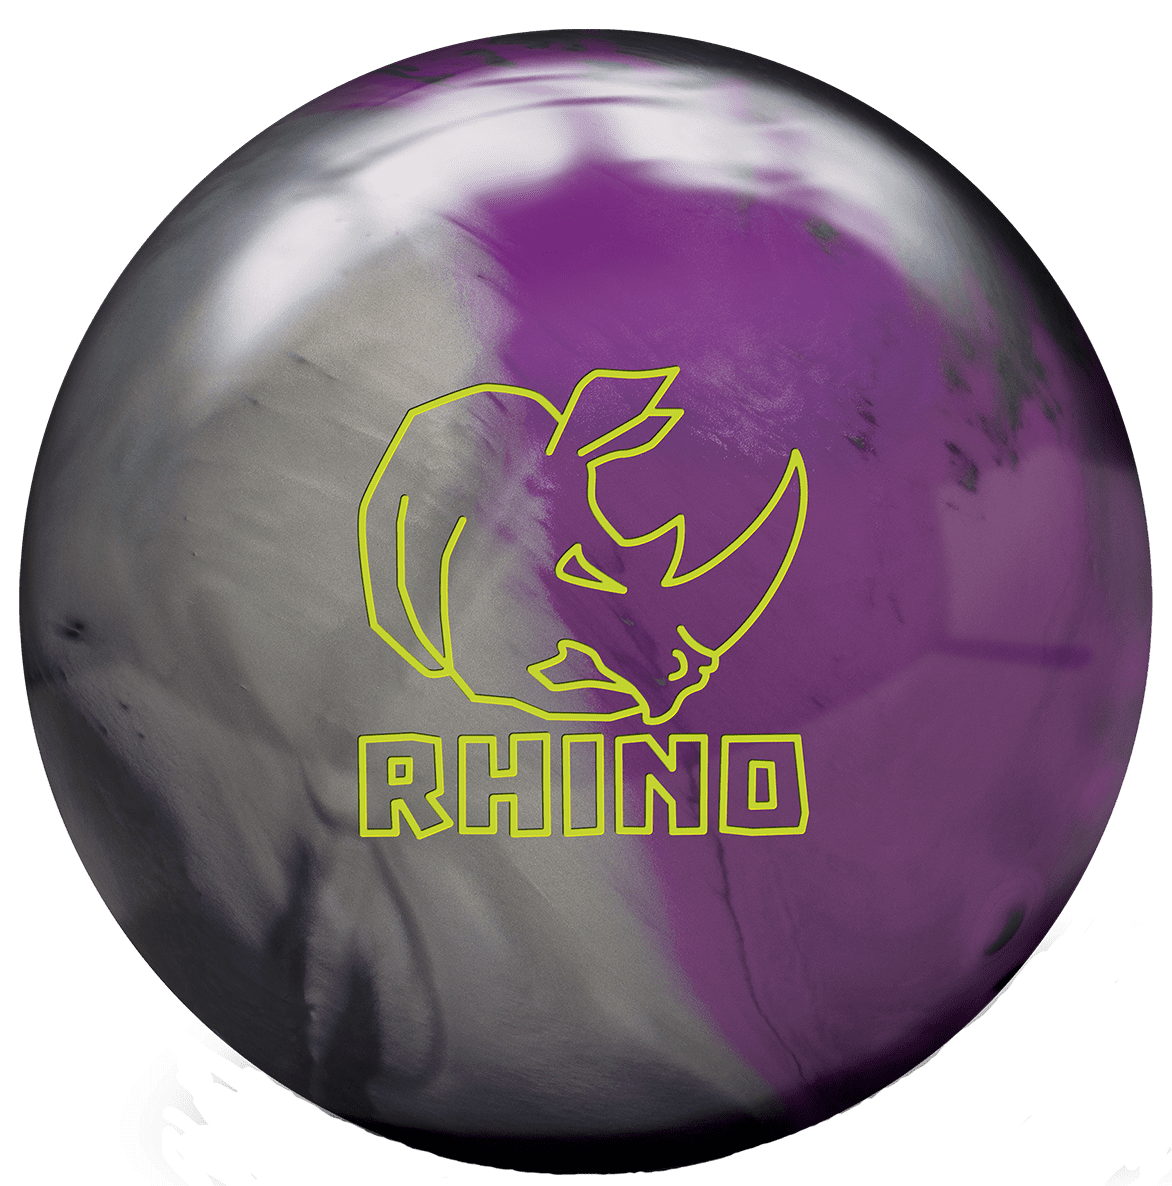 Brunswick Rhino Charcoal Silver Violet Bowling Ball Questions & Answers